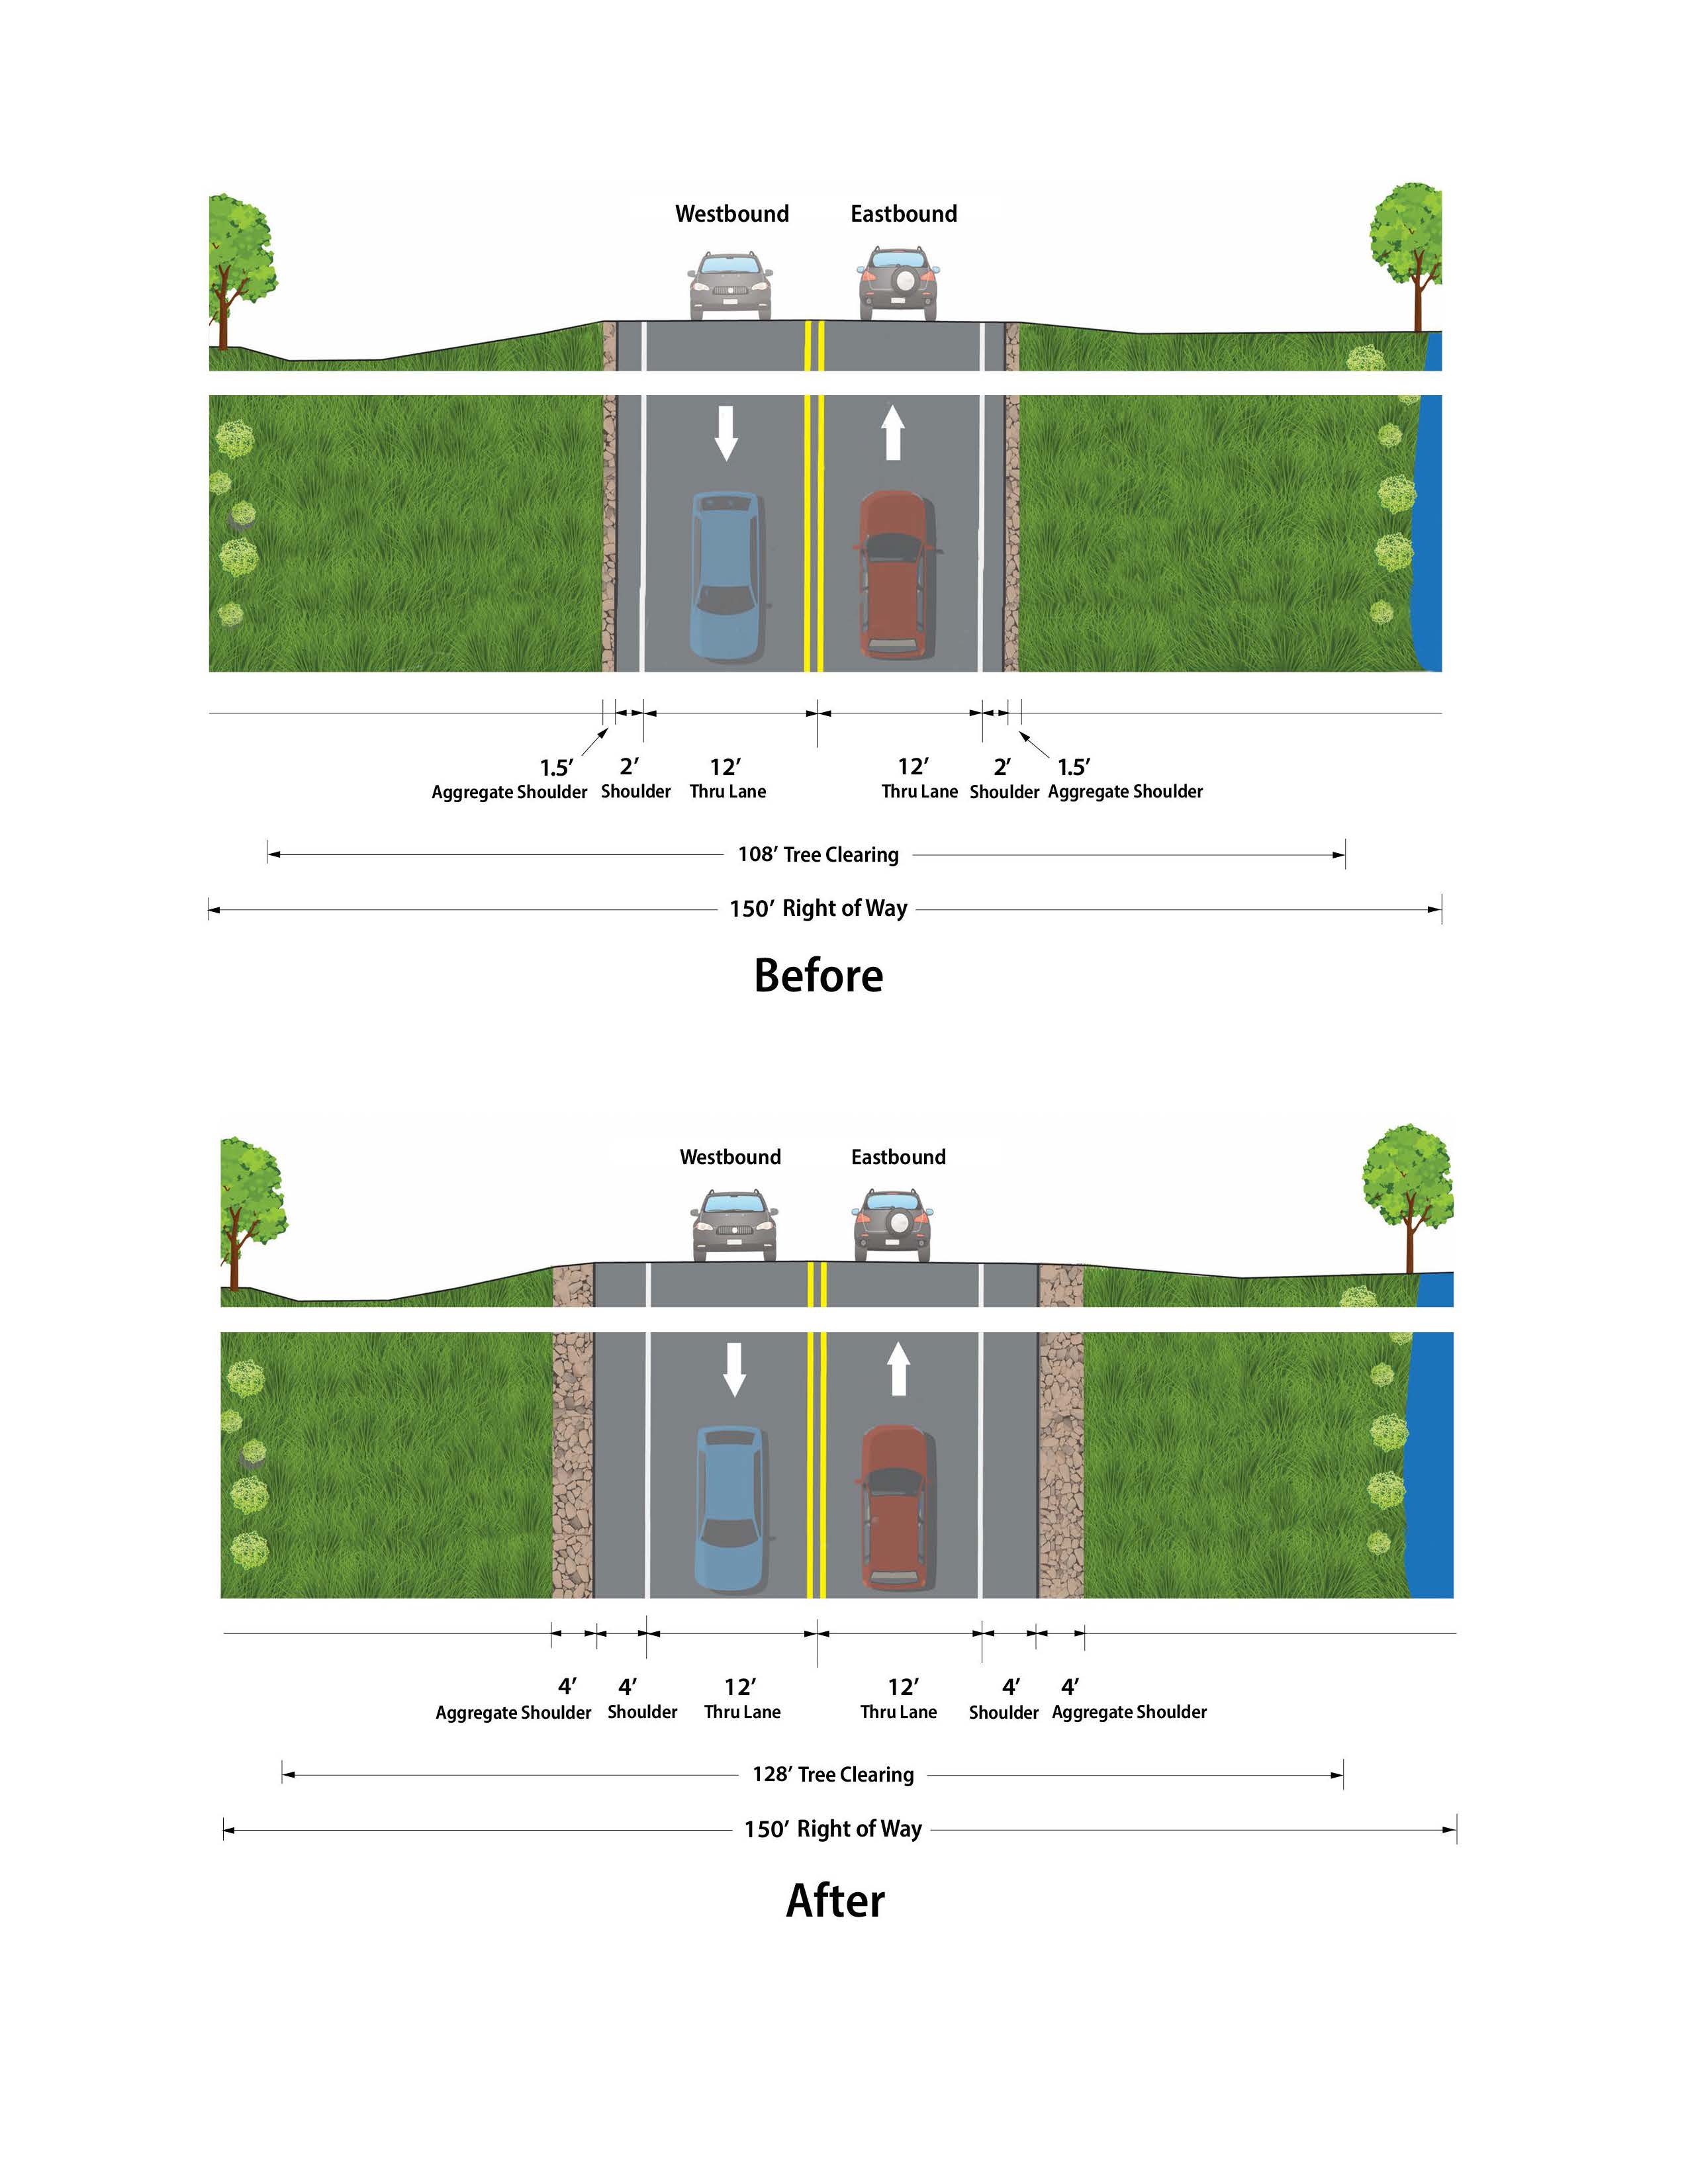 Graphic shows the Highway 55/59 before and after construction.